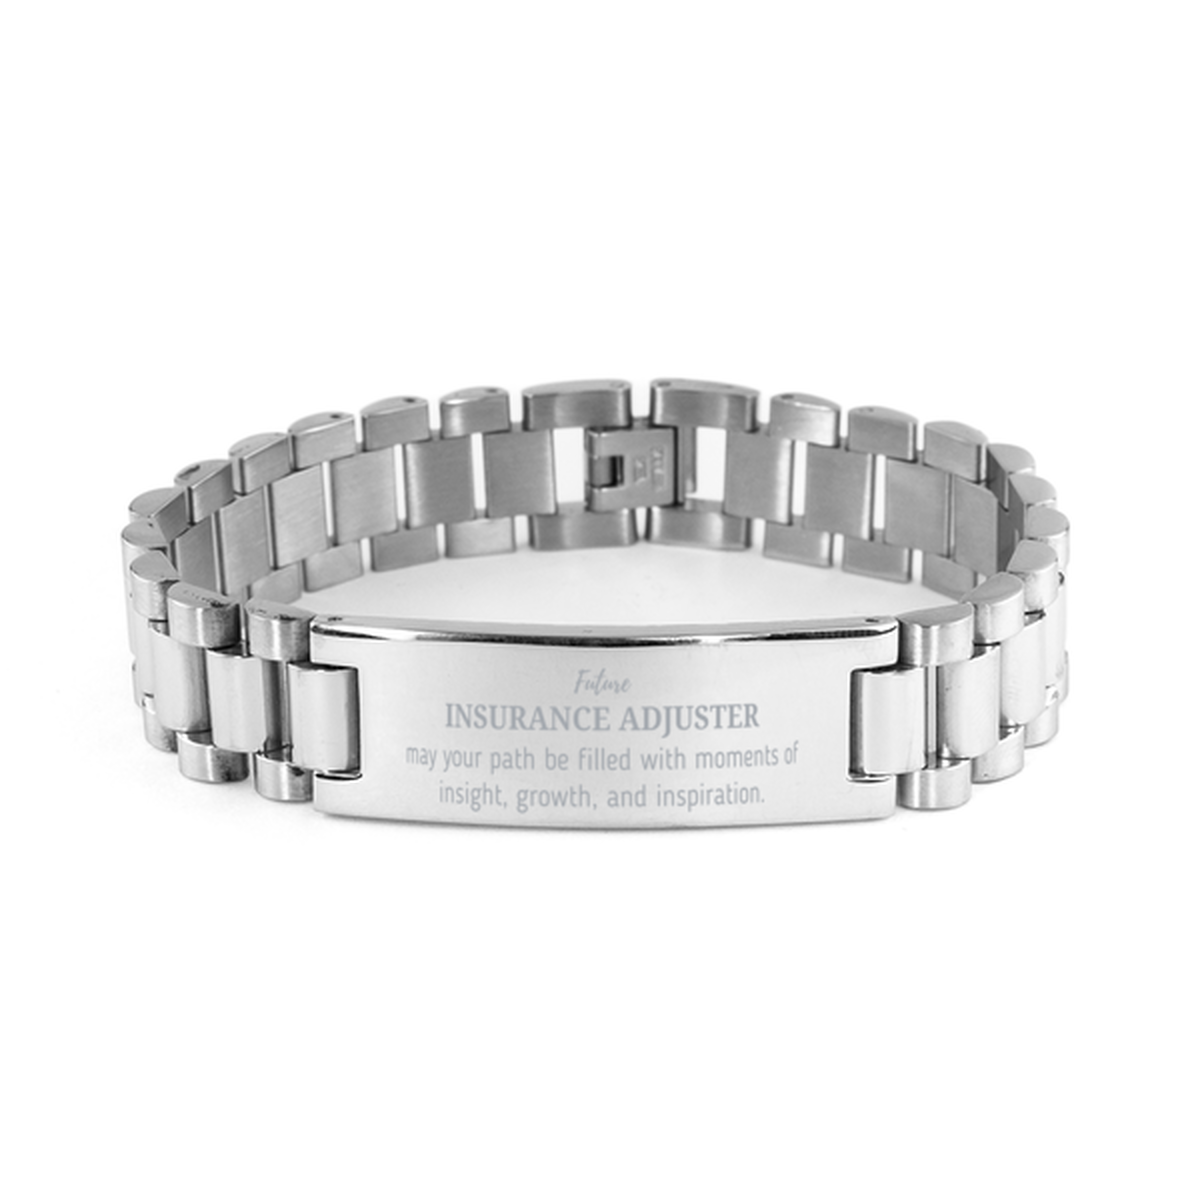 Future Insurance Adjuster Gifts, May your path be filled with moments of insight, Graduation Gifts for New Insurance Adjuster, Christmas Unique Ladder Stainless Steel Bracelet For Men, Women, Friends